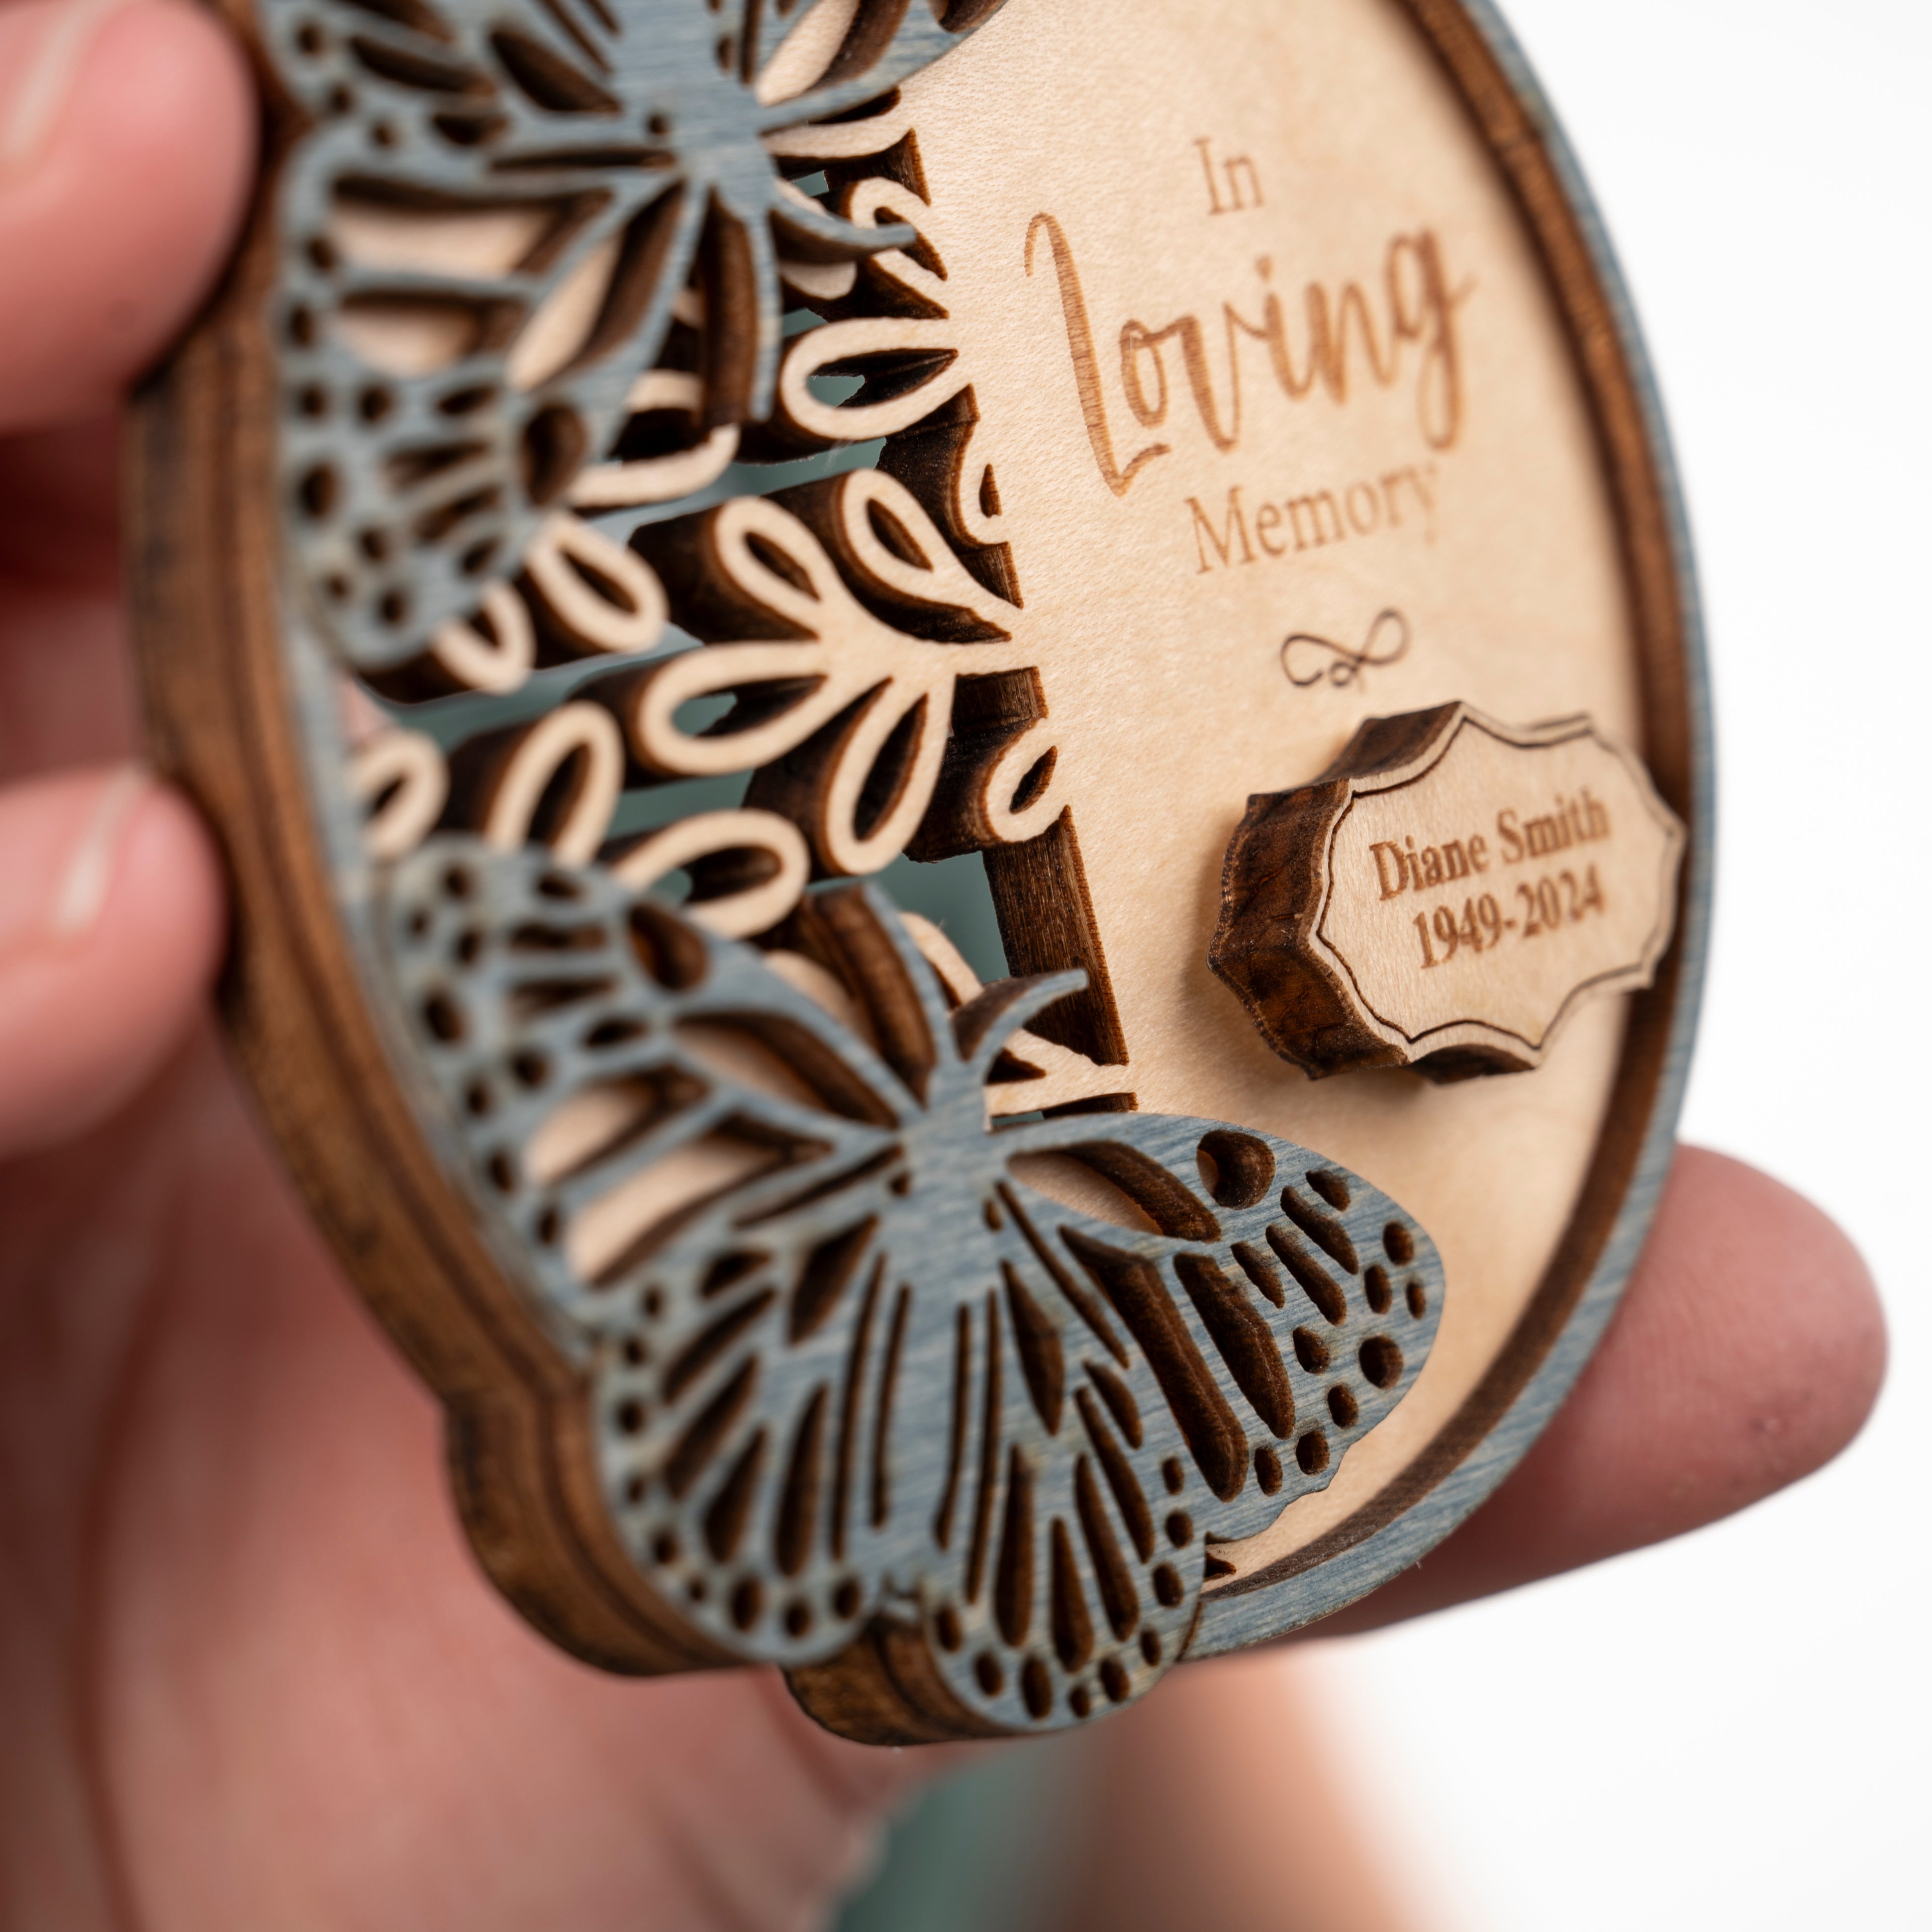 In Loving Memory Butterfly, Dragonfly, or Hummingbird Ornaments / Magnets / Signs - Sticks & Doodles